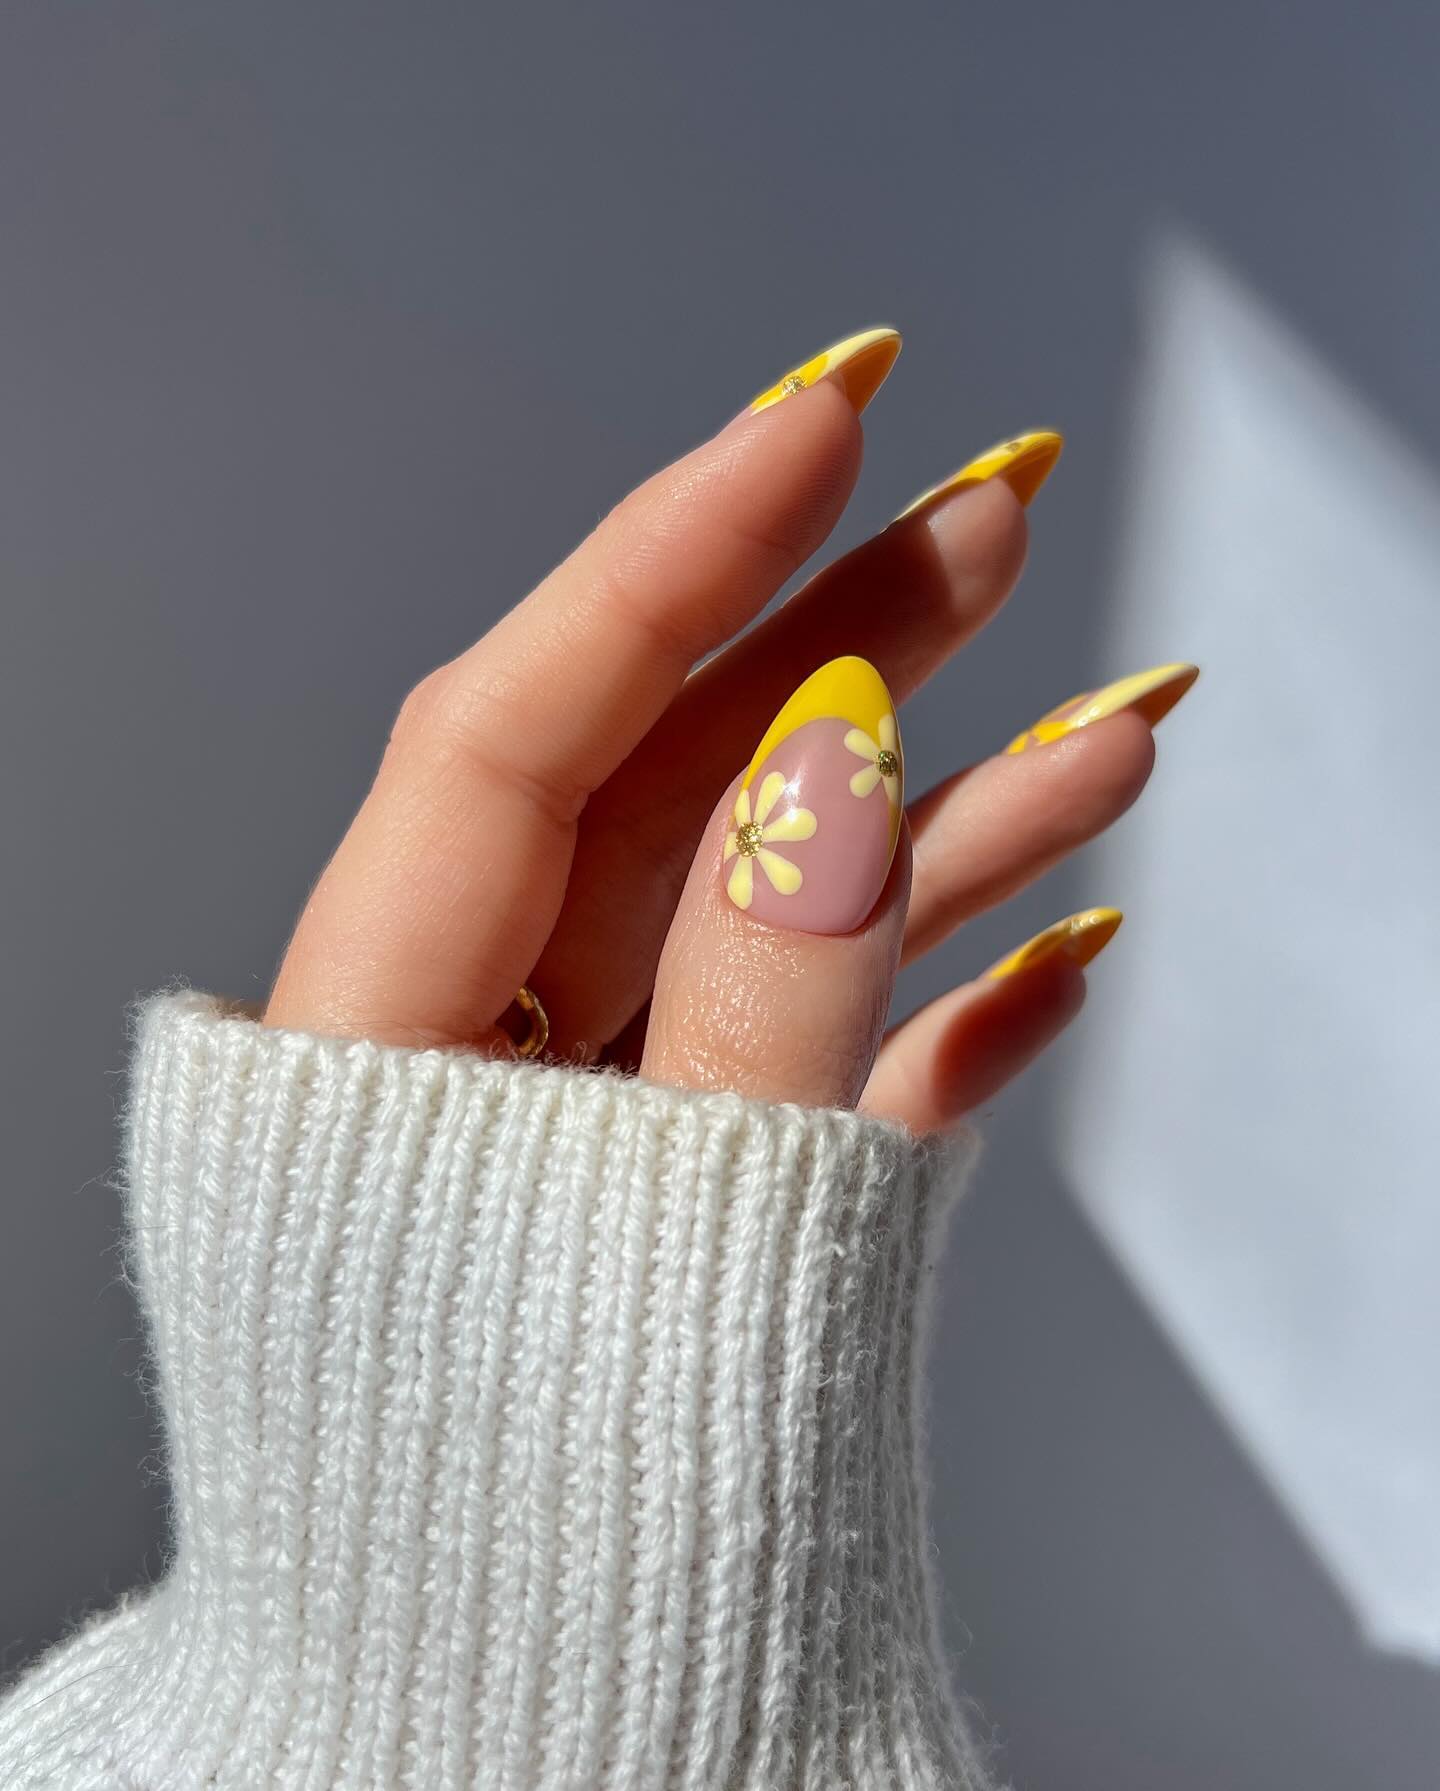 100+ Short Nail Designs You’ll Want To Try This Year images 102